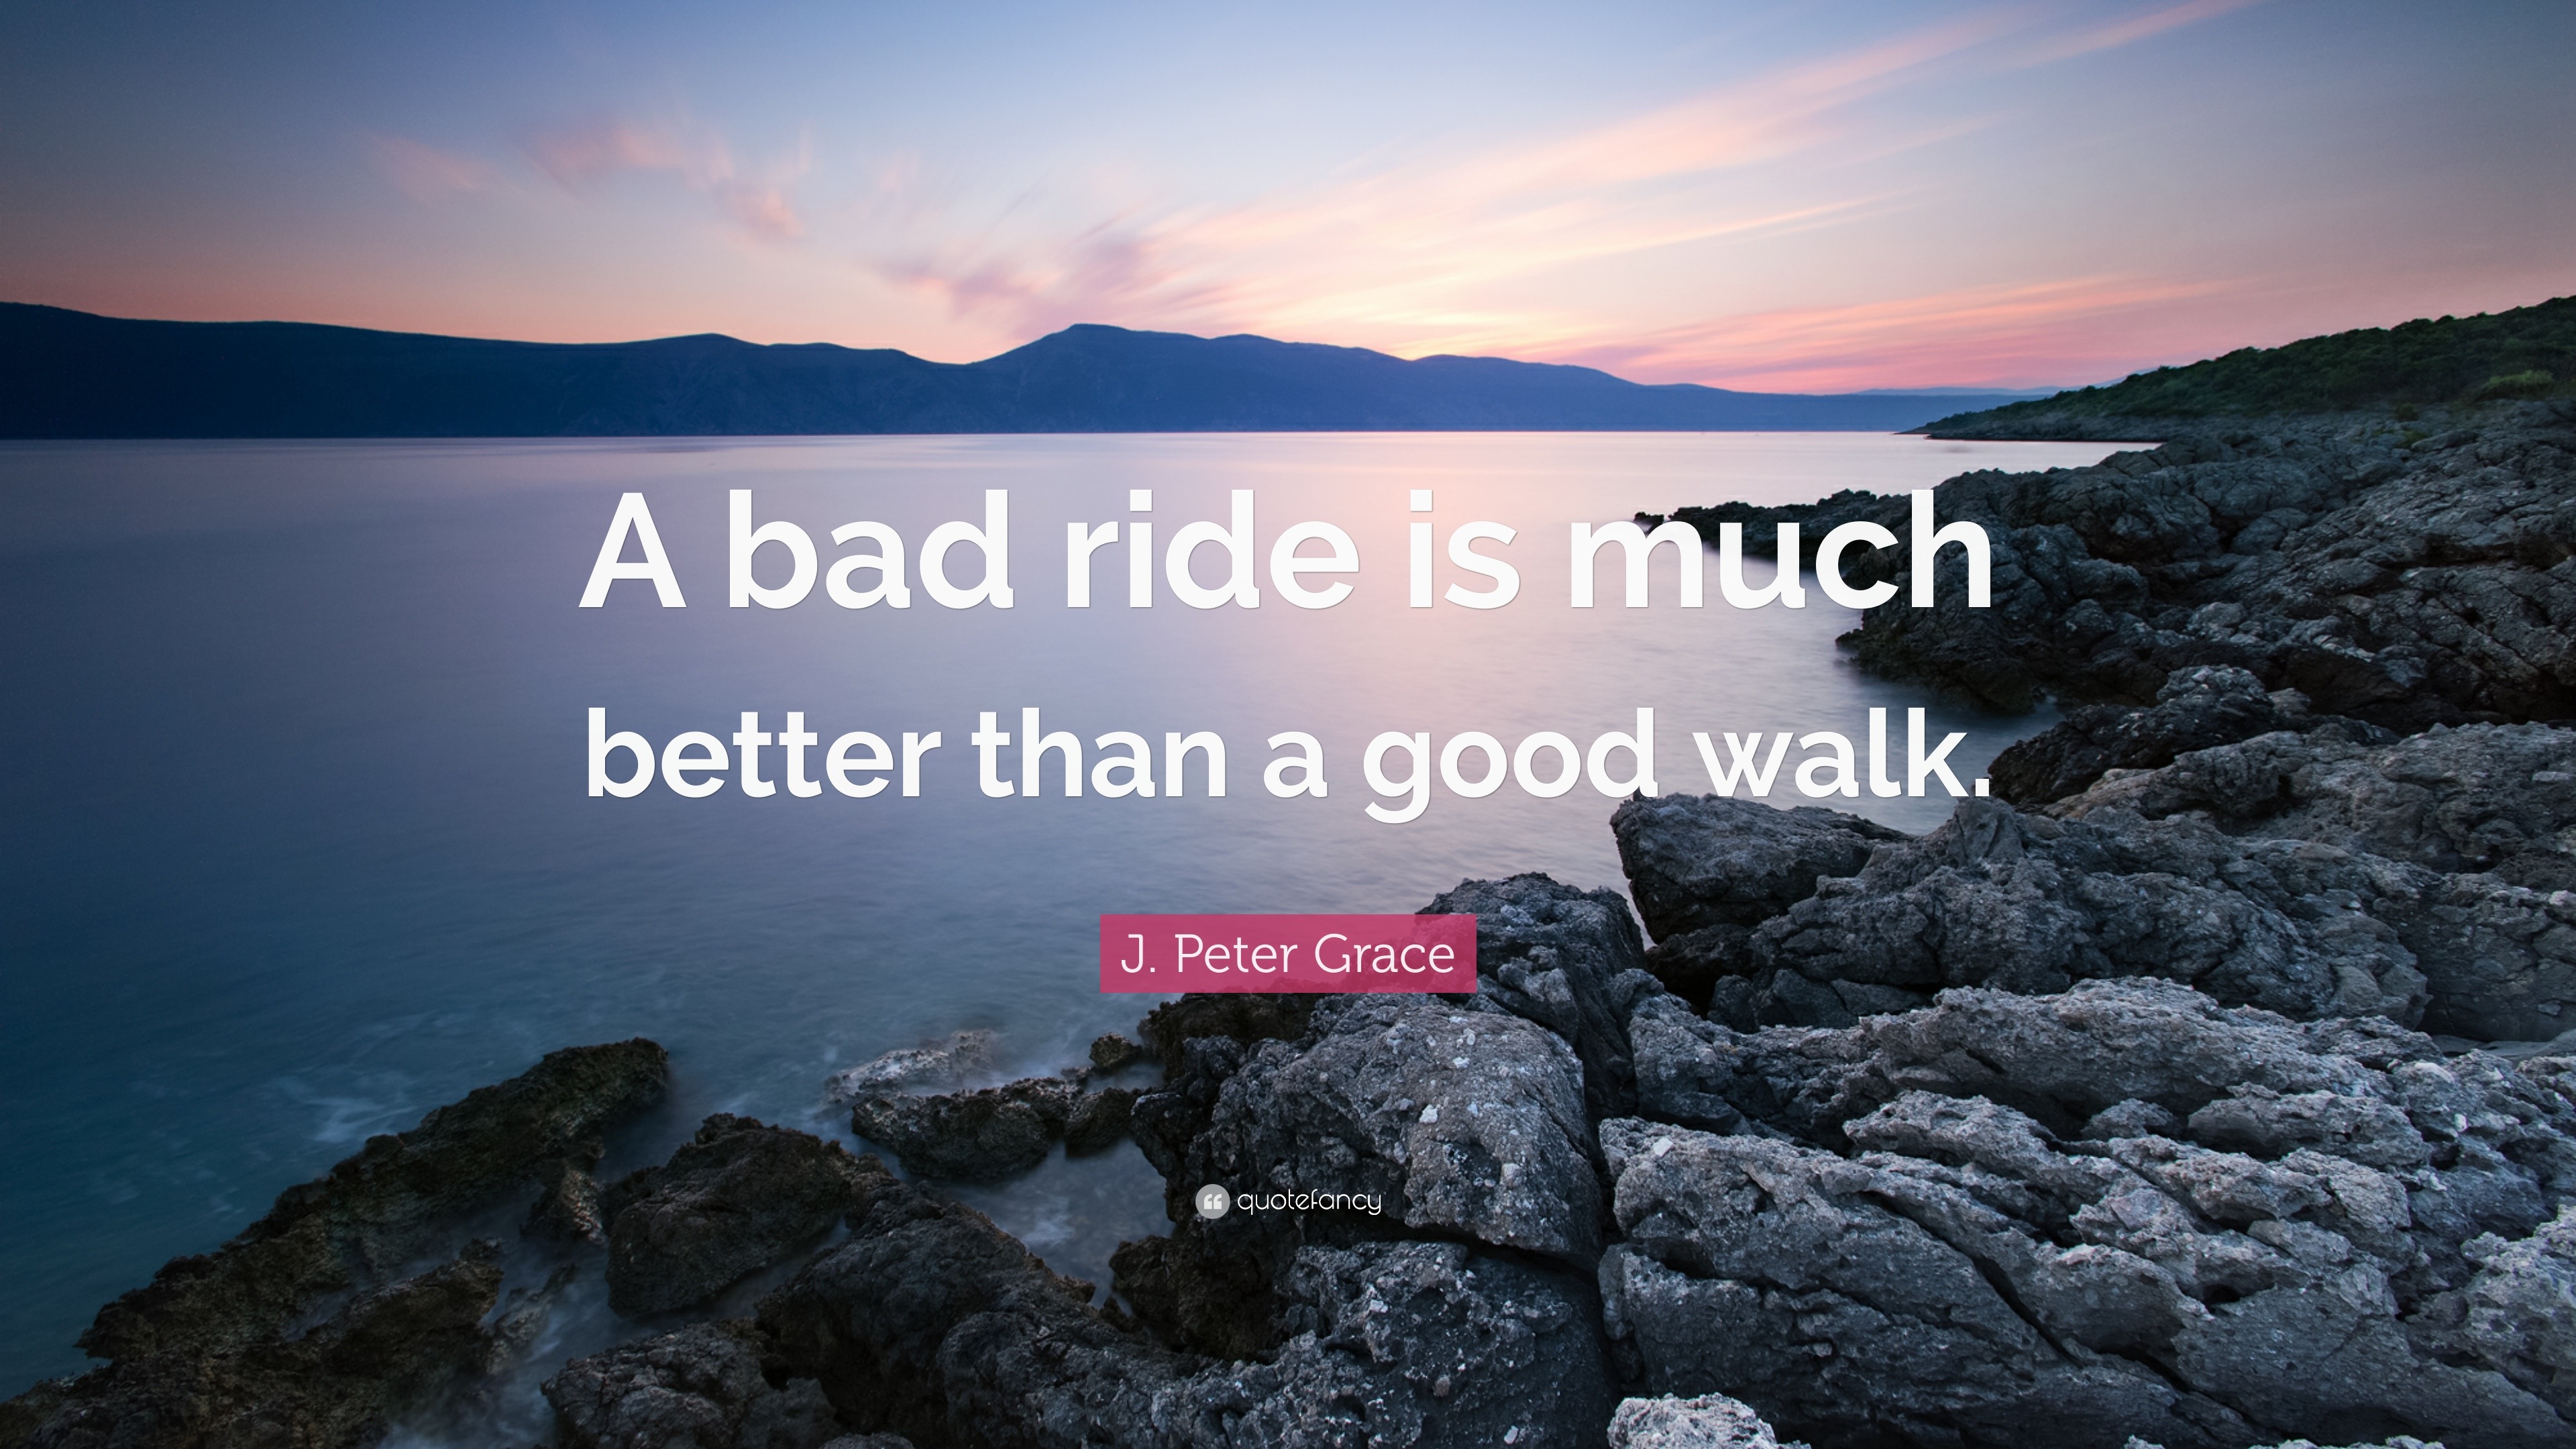 J. Peter Grace Quote: “A bad ride is much better than a good walk.”